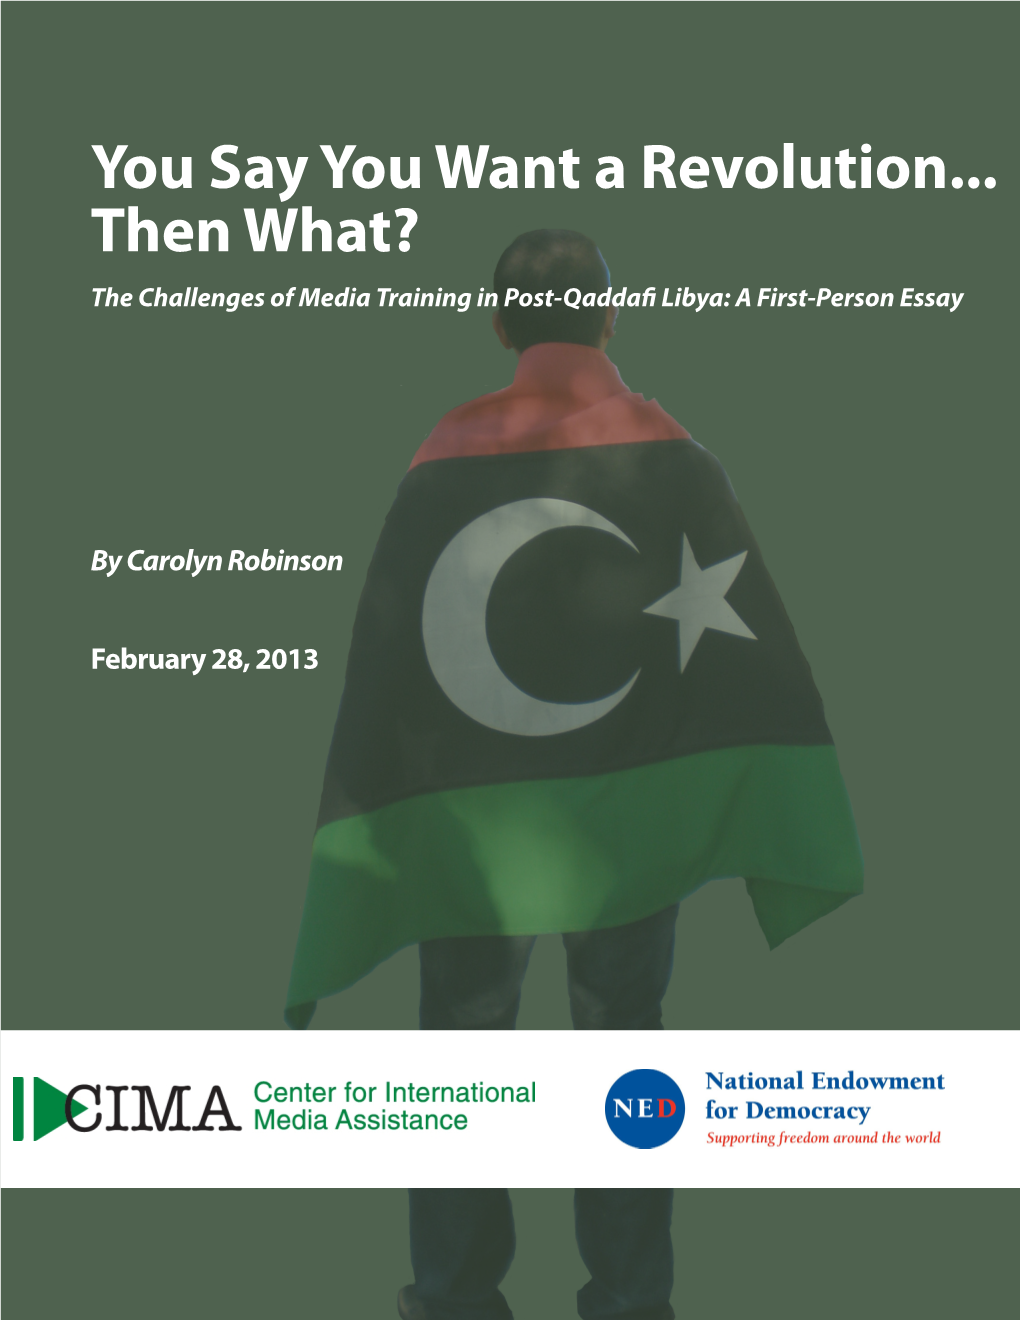 You Say You Want a Revolution... Then What? the Challenges of Media Training in Post-Qaddafi Libya: a First-Person Essay